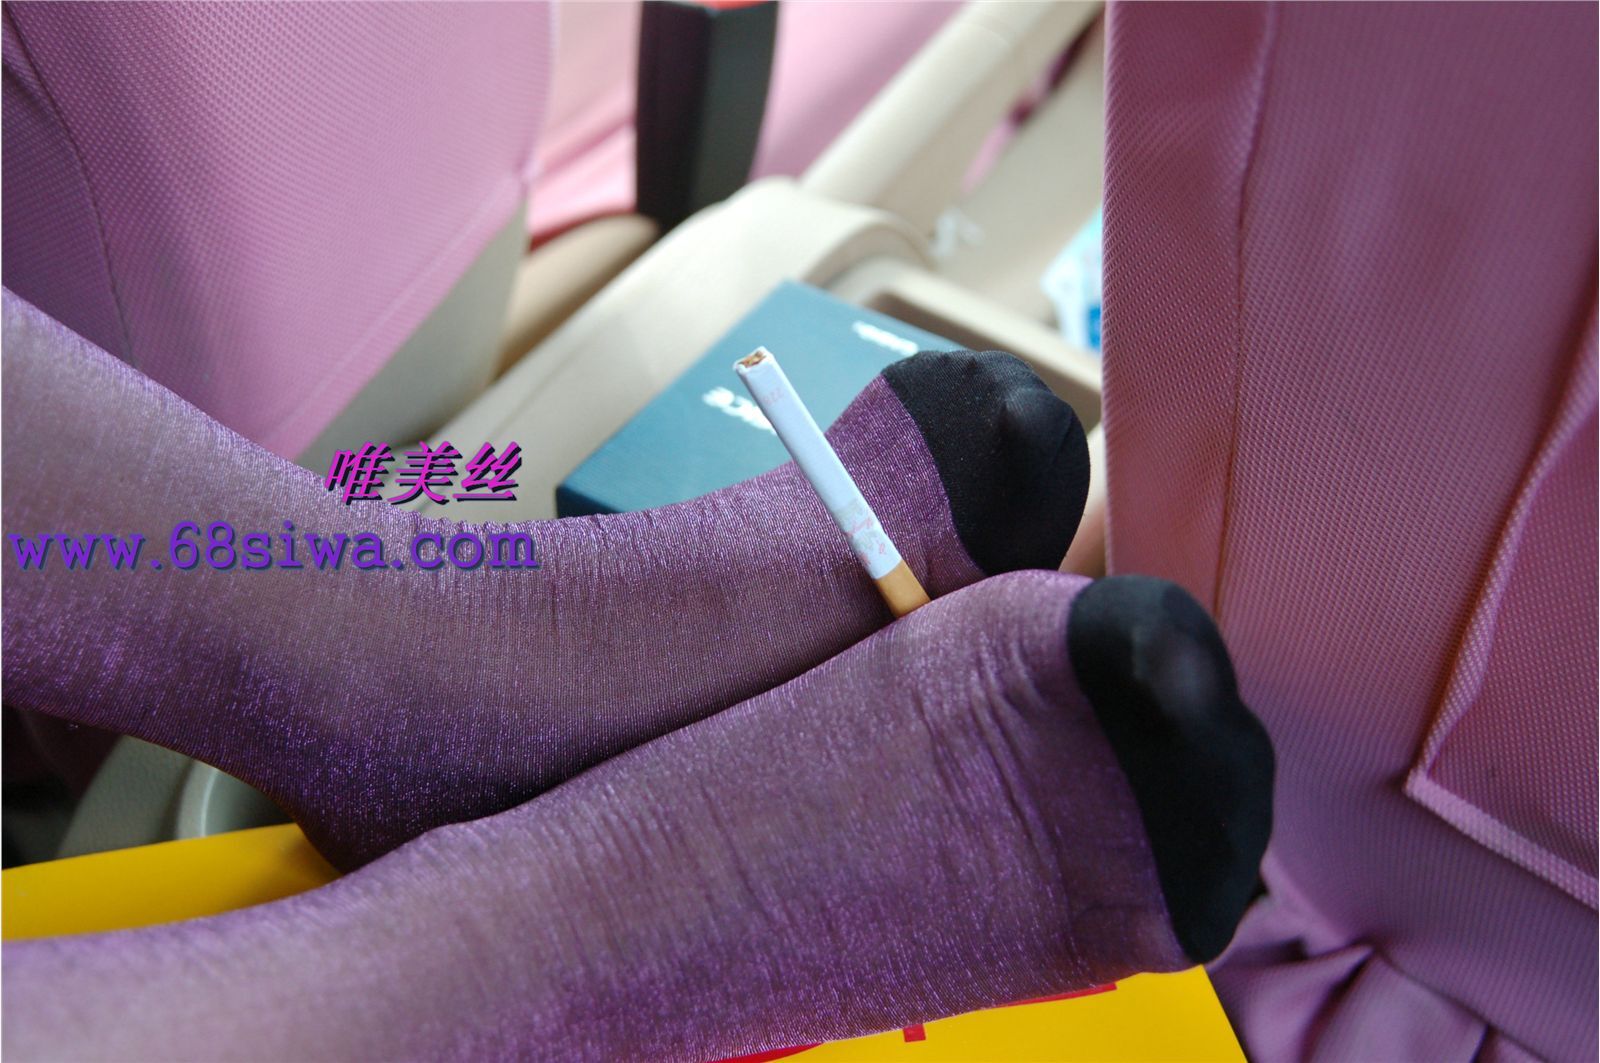 Pictures of Lulu's domestic silk feet and legs